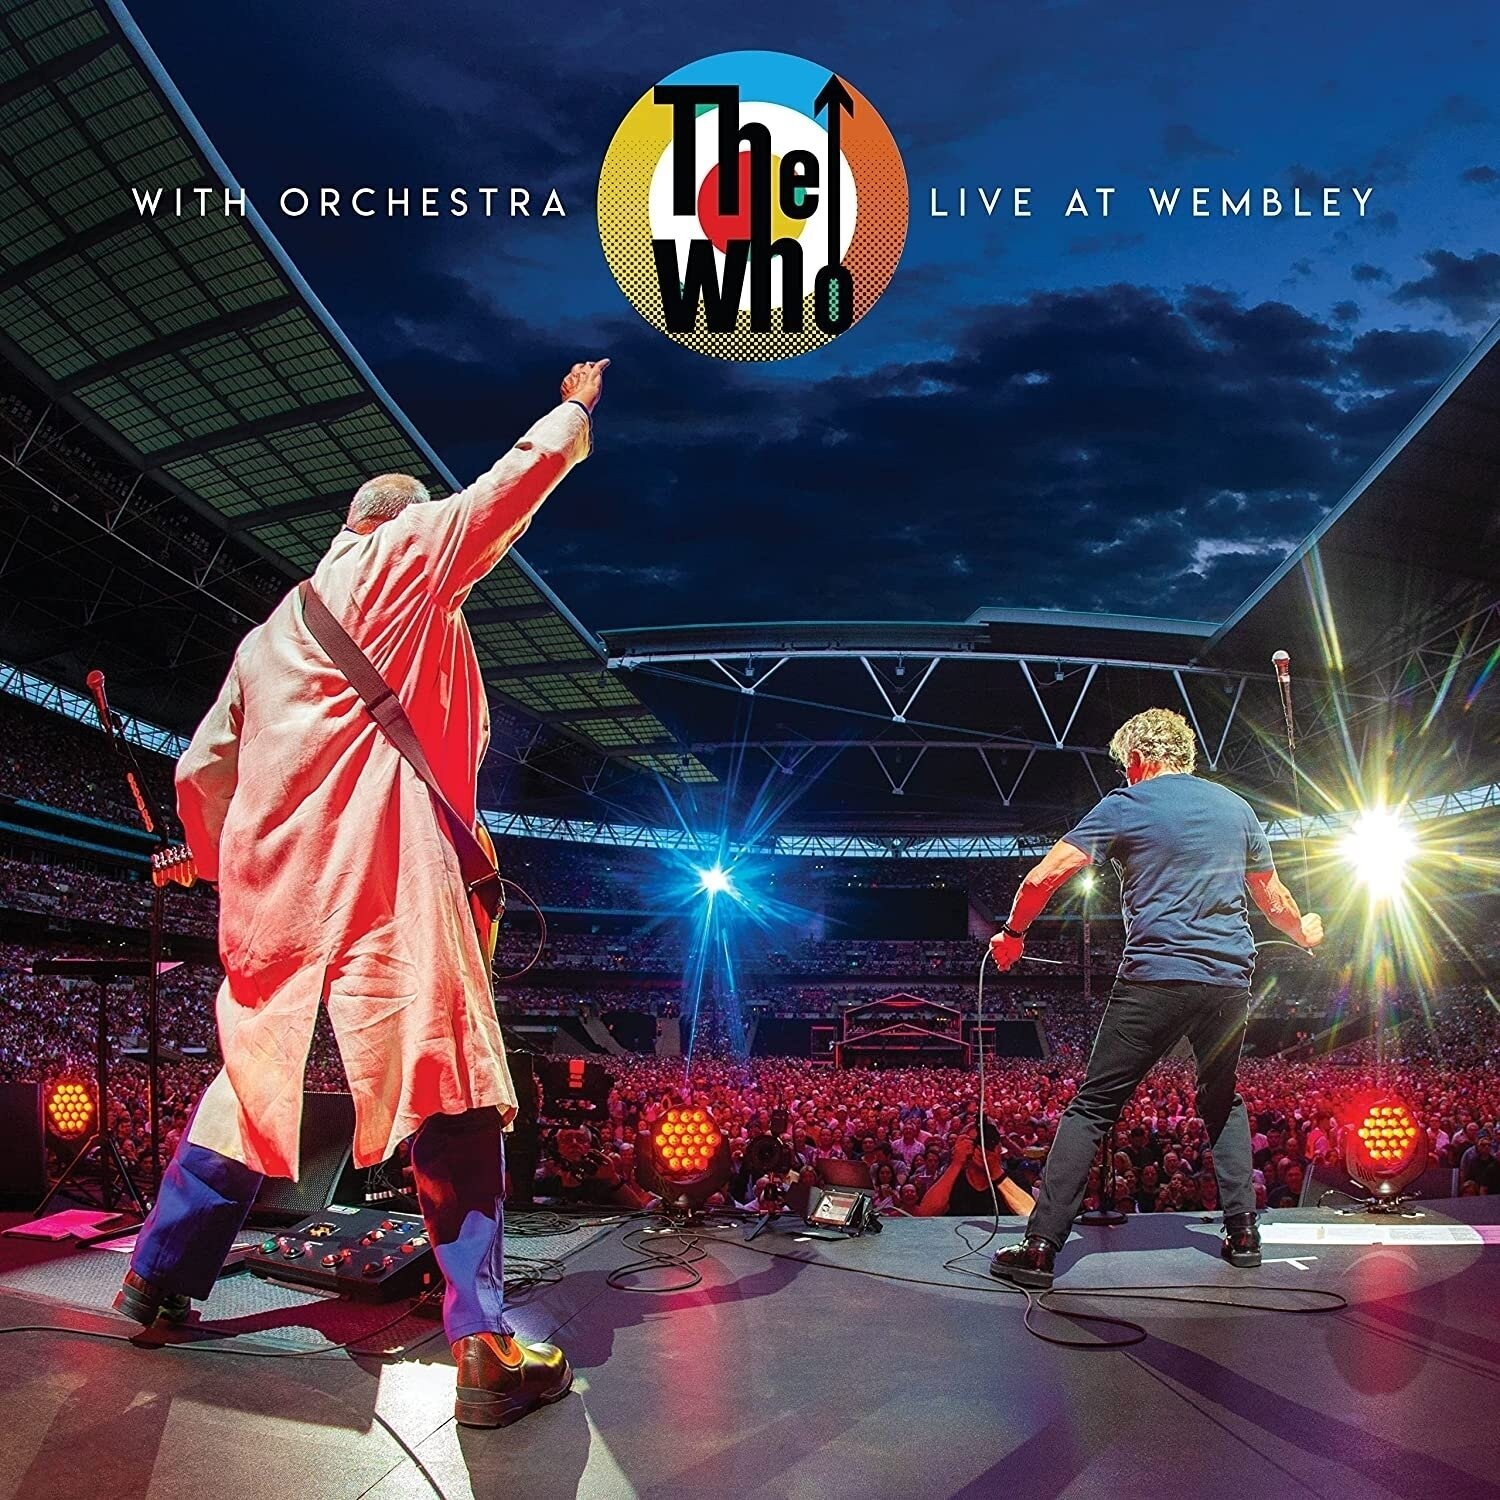 Glasbene CD The Who - With Orchestra: Live At Wembley (2 CD + Blu-ray)